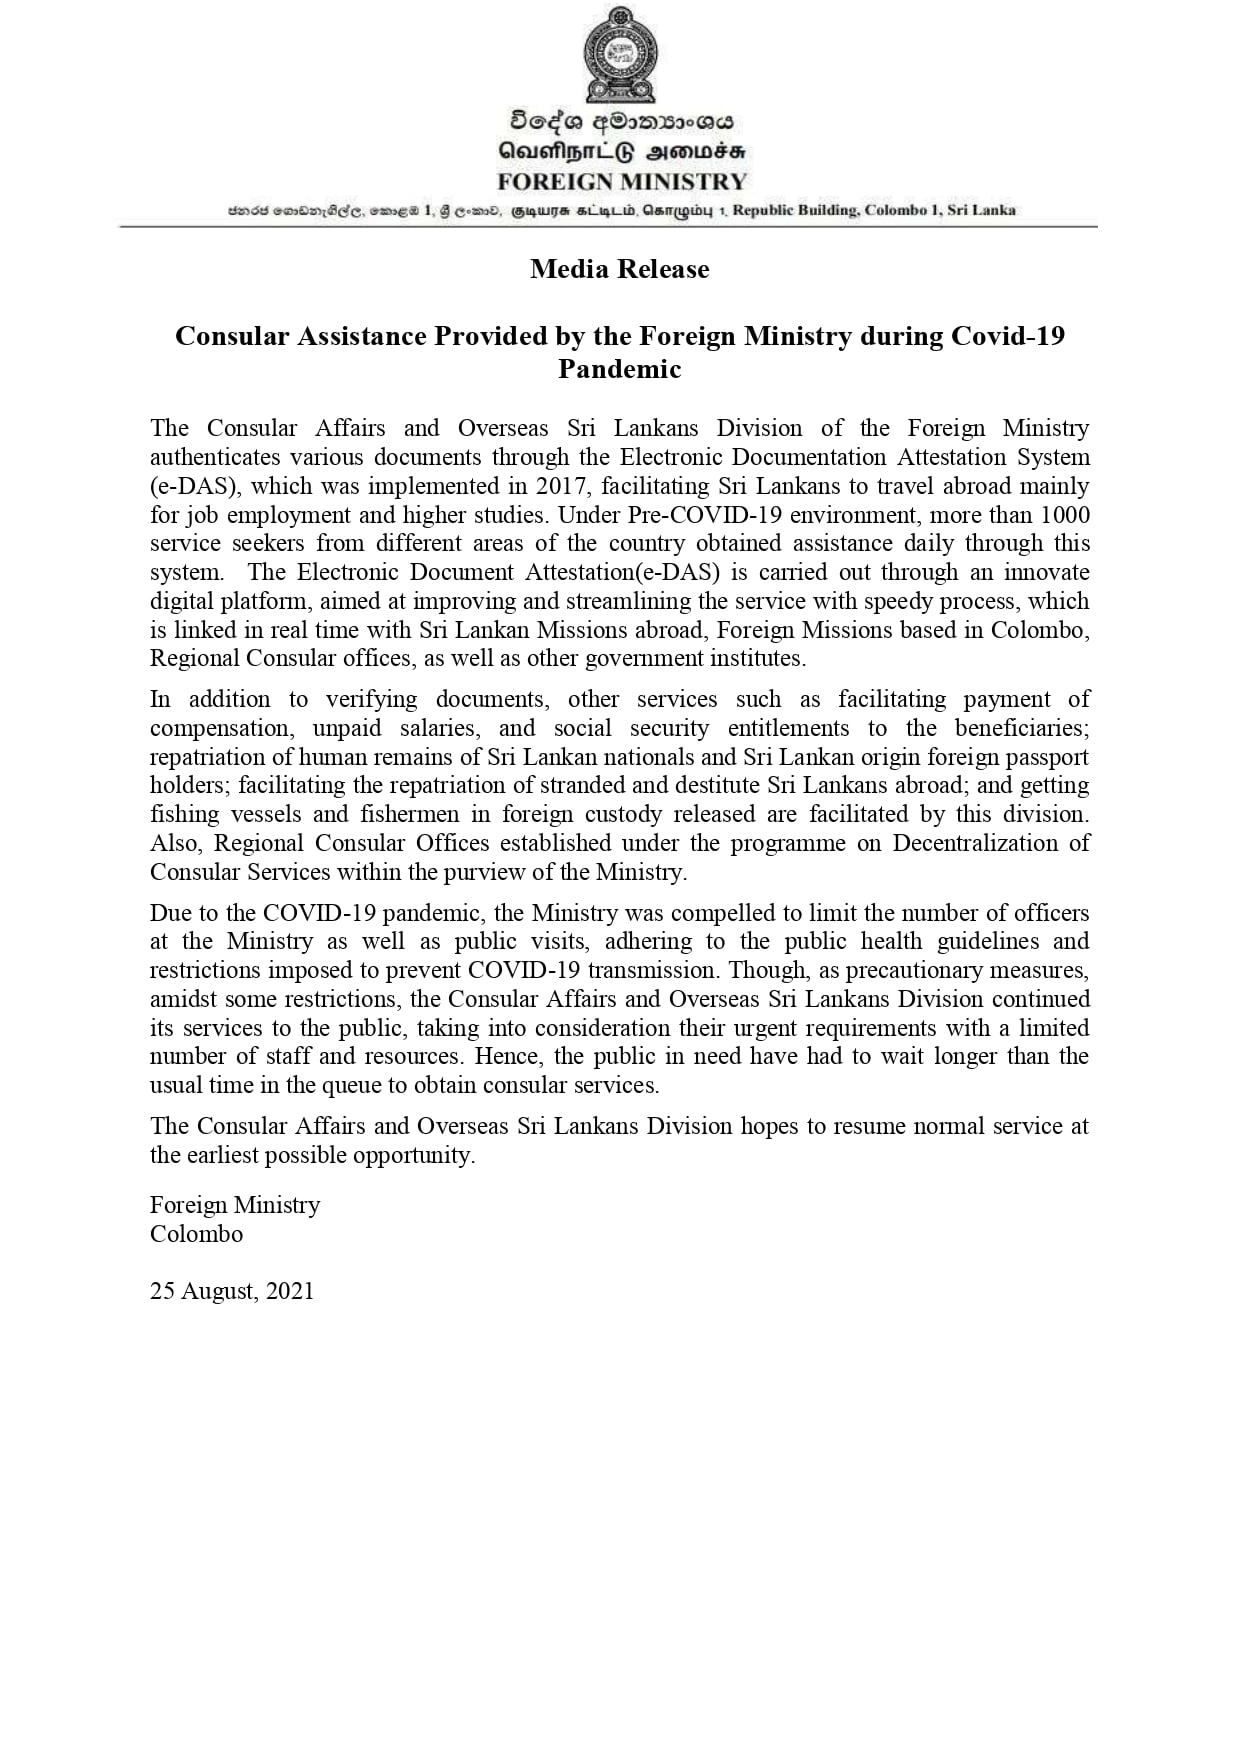 Consular Assistance Provided by the Foreign Ministry during Covid-19 Pandemic